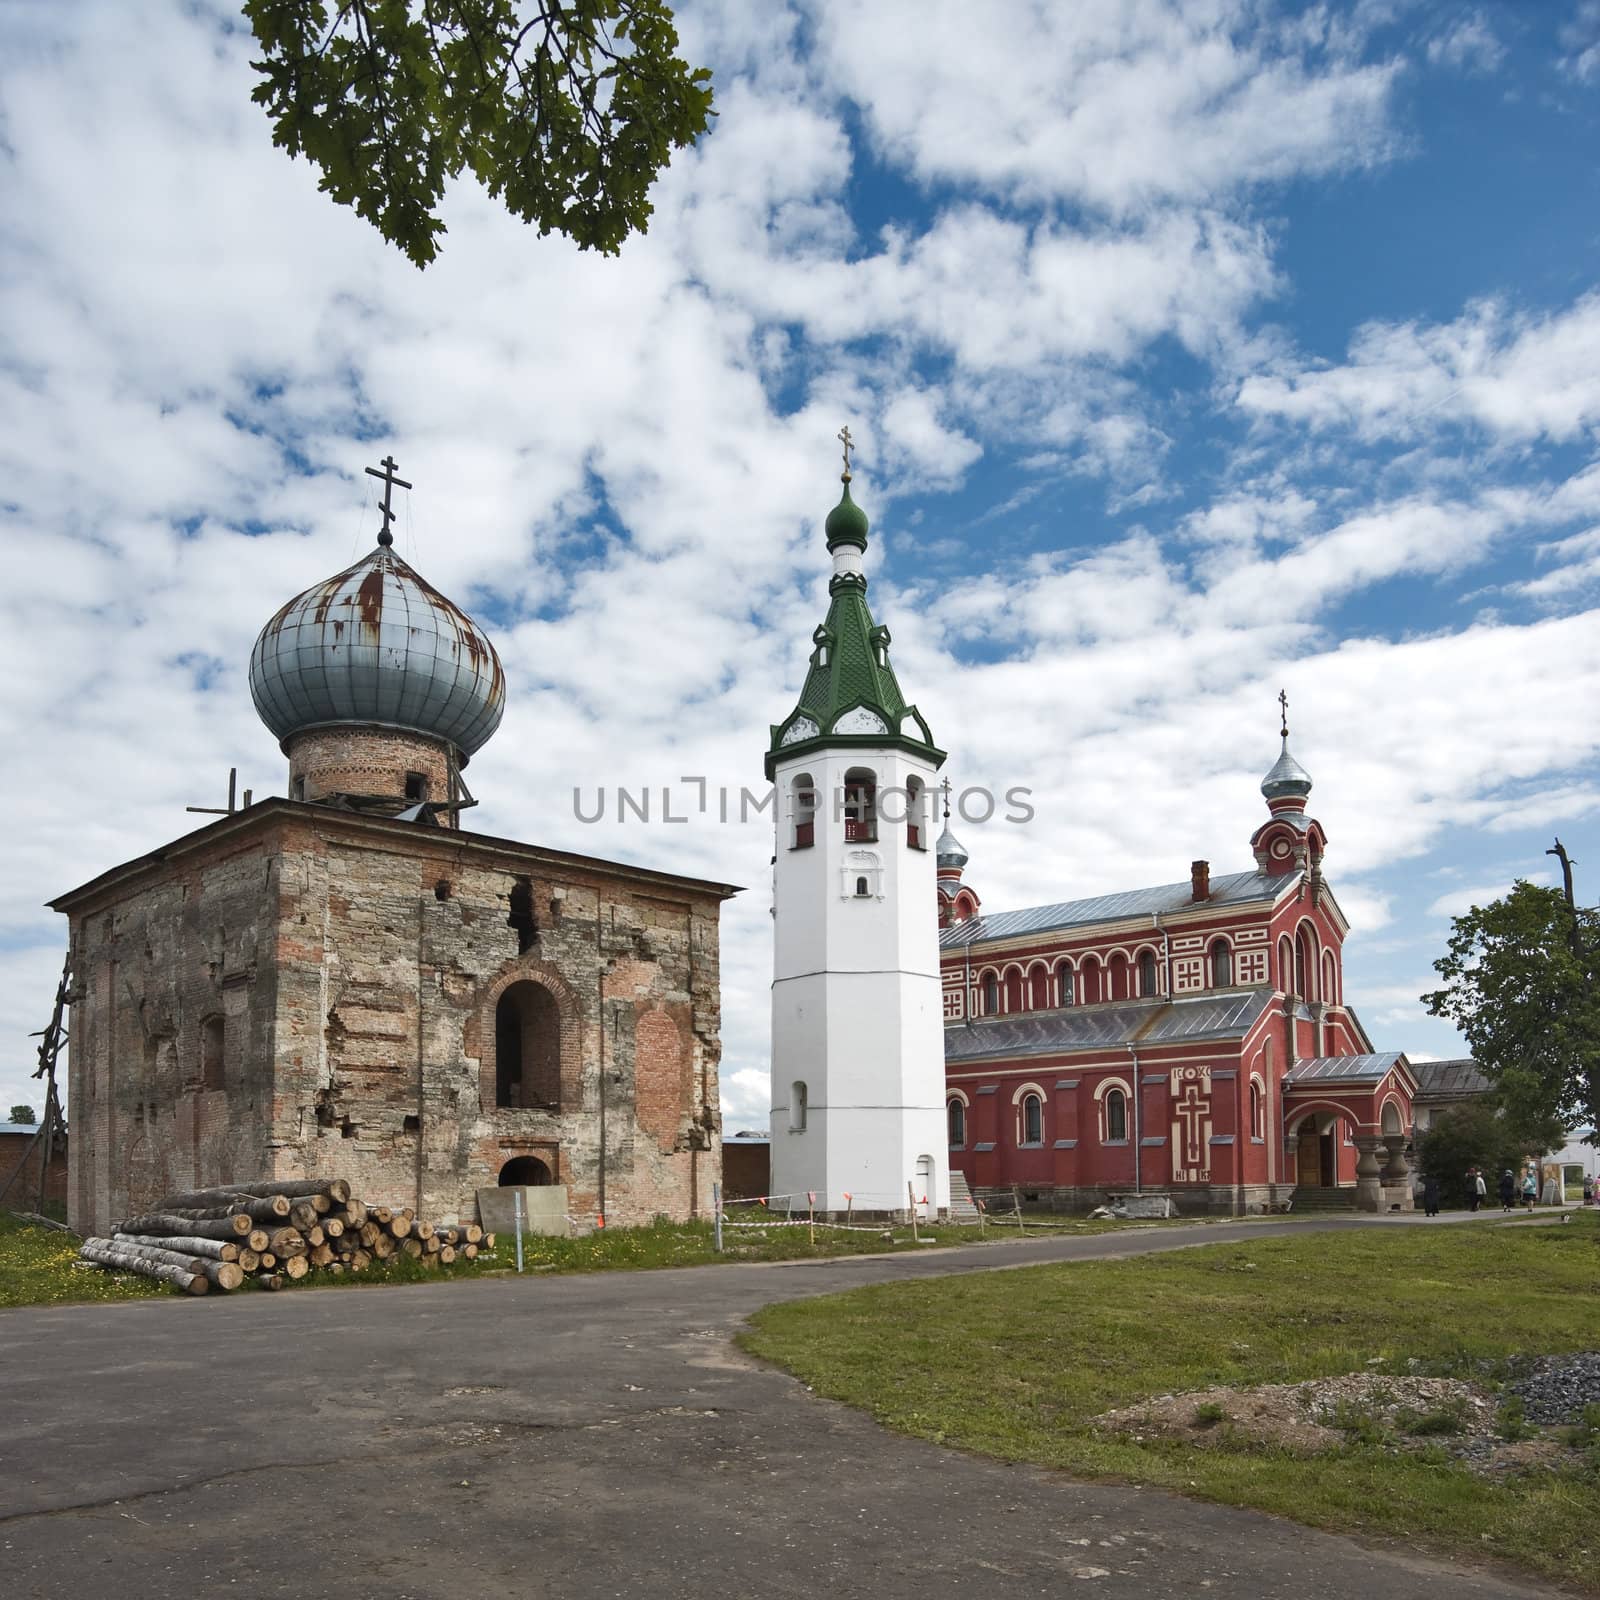 Renovating monastery churches and belltower